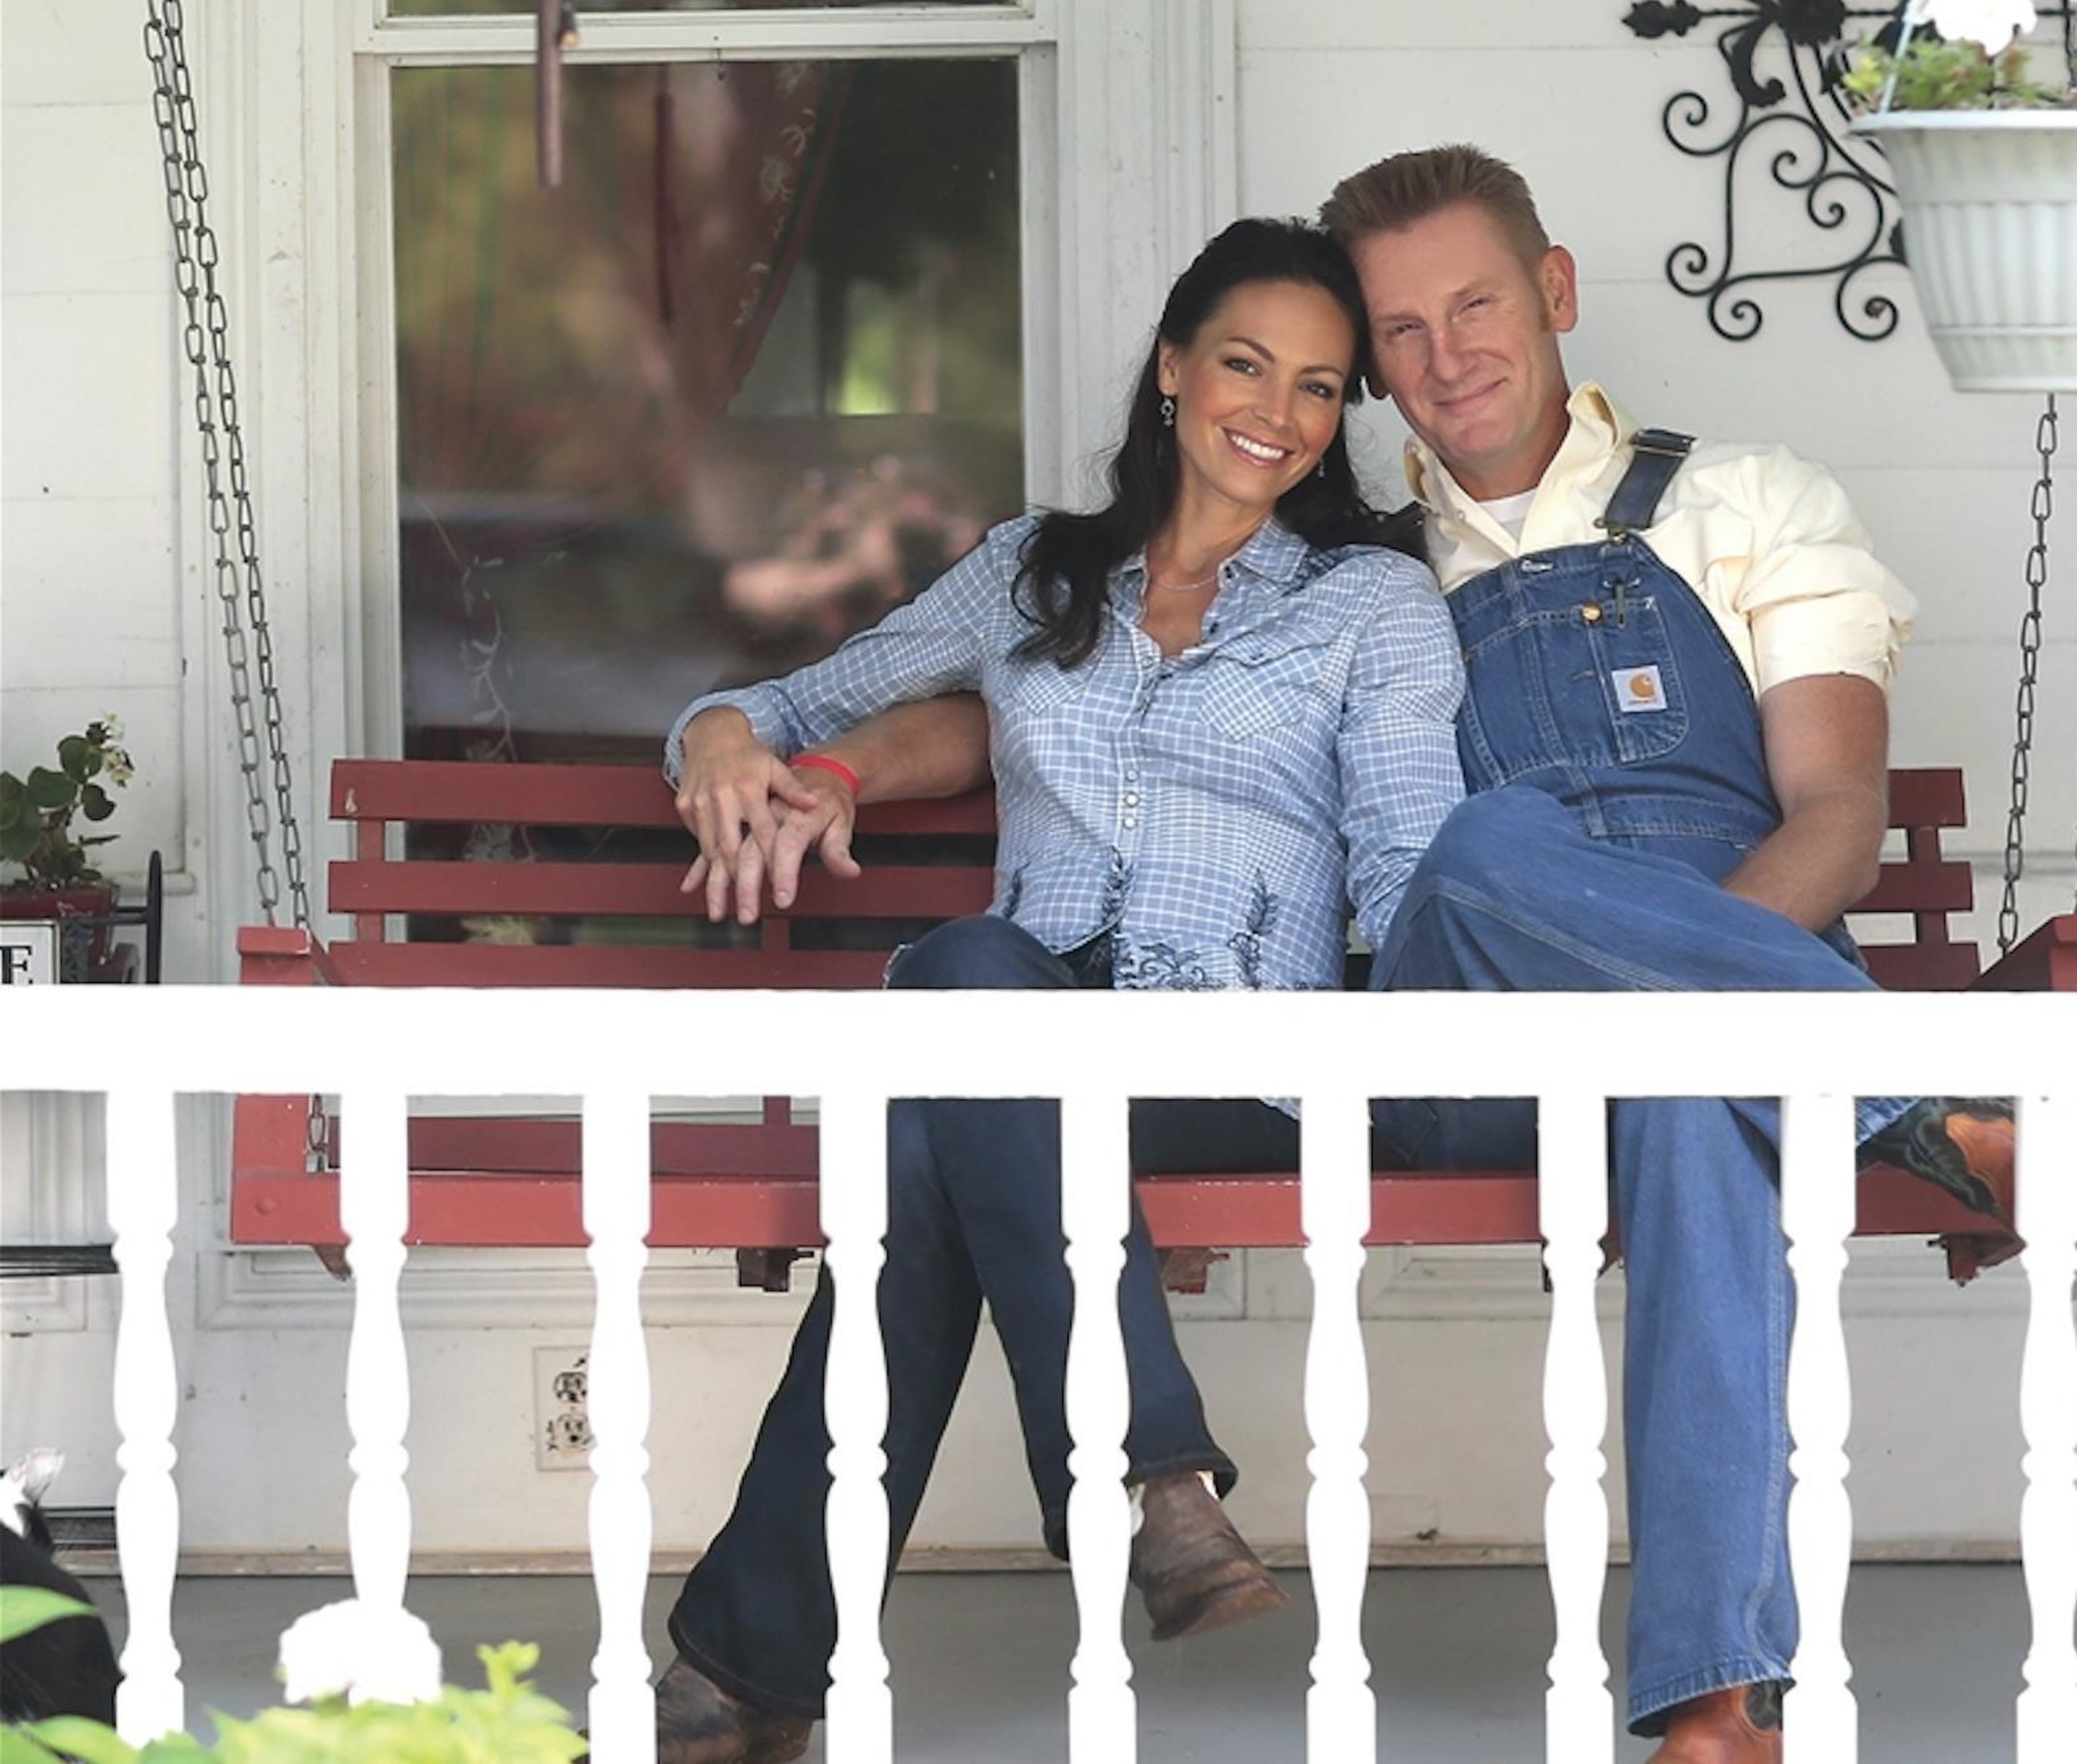 Rory Feek from the Grammy-nominated country music duo JOEY+RORY will participate in the panel discussion.  Joey died from cervical cancer in March of 2016.  Feek shared his wife's experiences and challenges very publicly on the couple's blog ThisLifeILive.com.